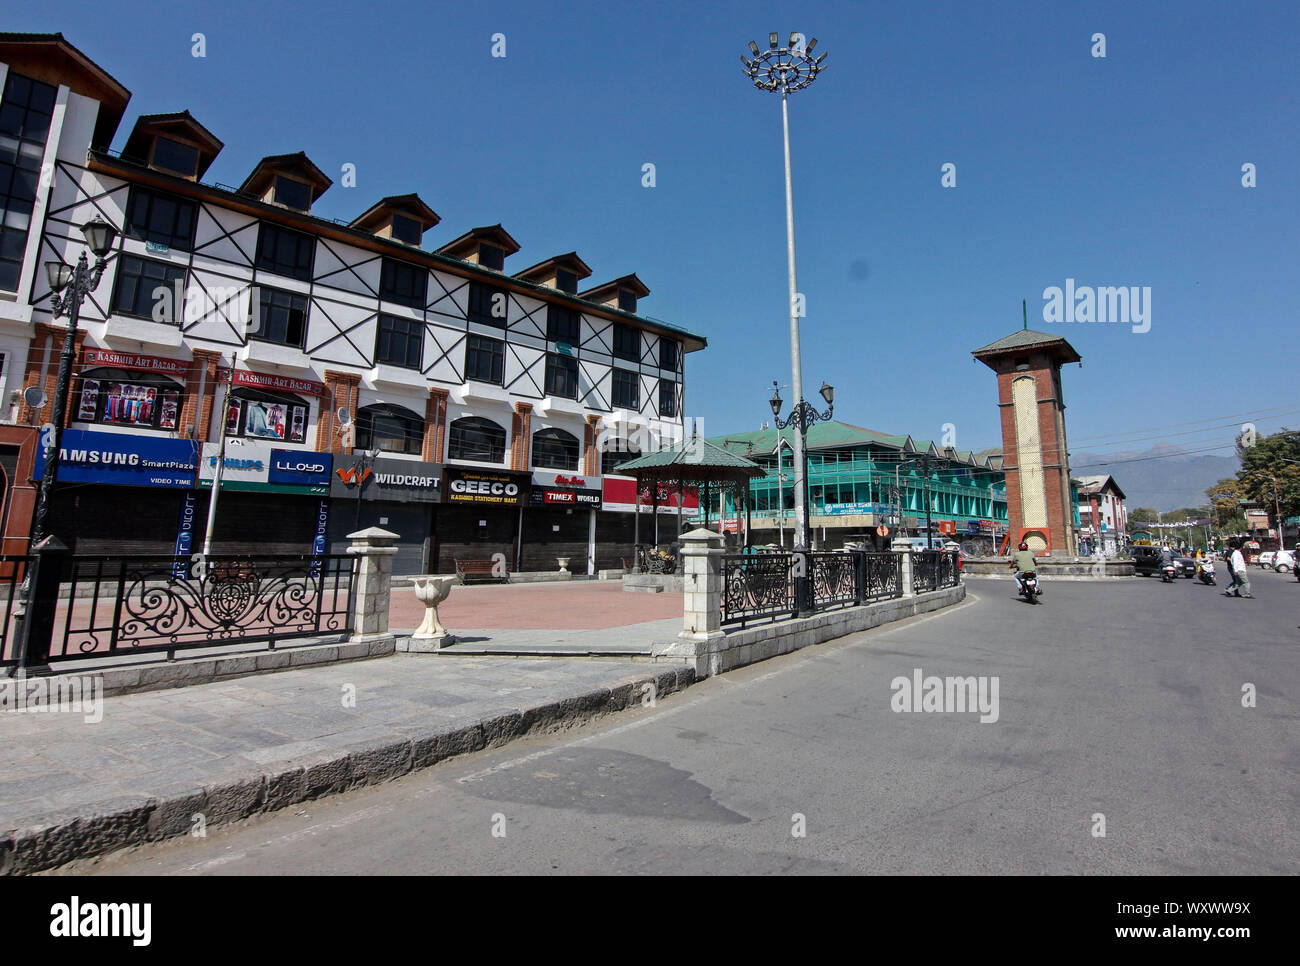 A view of the main shopping hub during the shutdown in Srinagar, Kashmir.Kashmir valley remained shut for the 45th consecutive day following the scrapping of Article 370 by the central government which grants special status to Jammu & Kashmir. Stock Photo